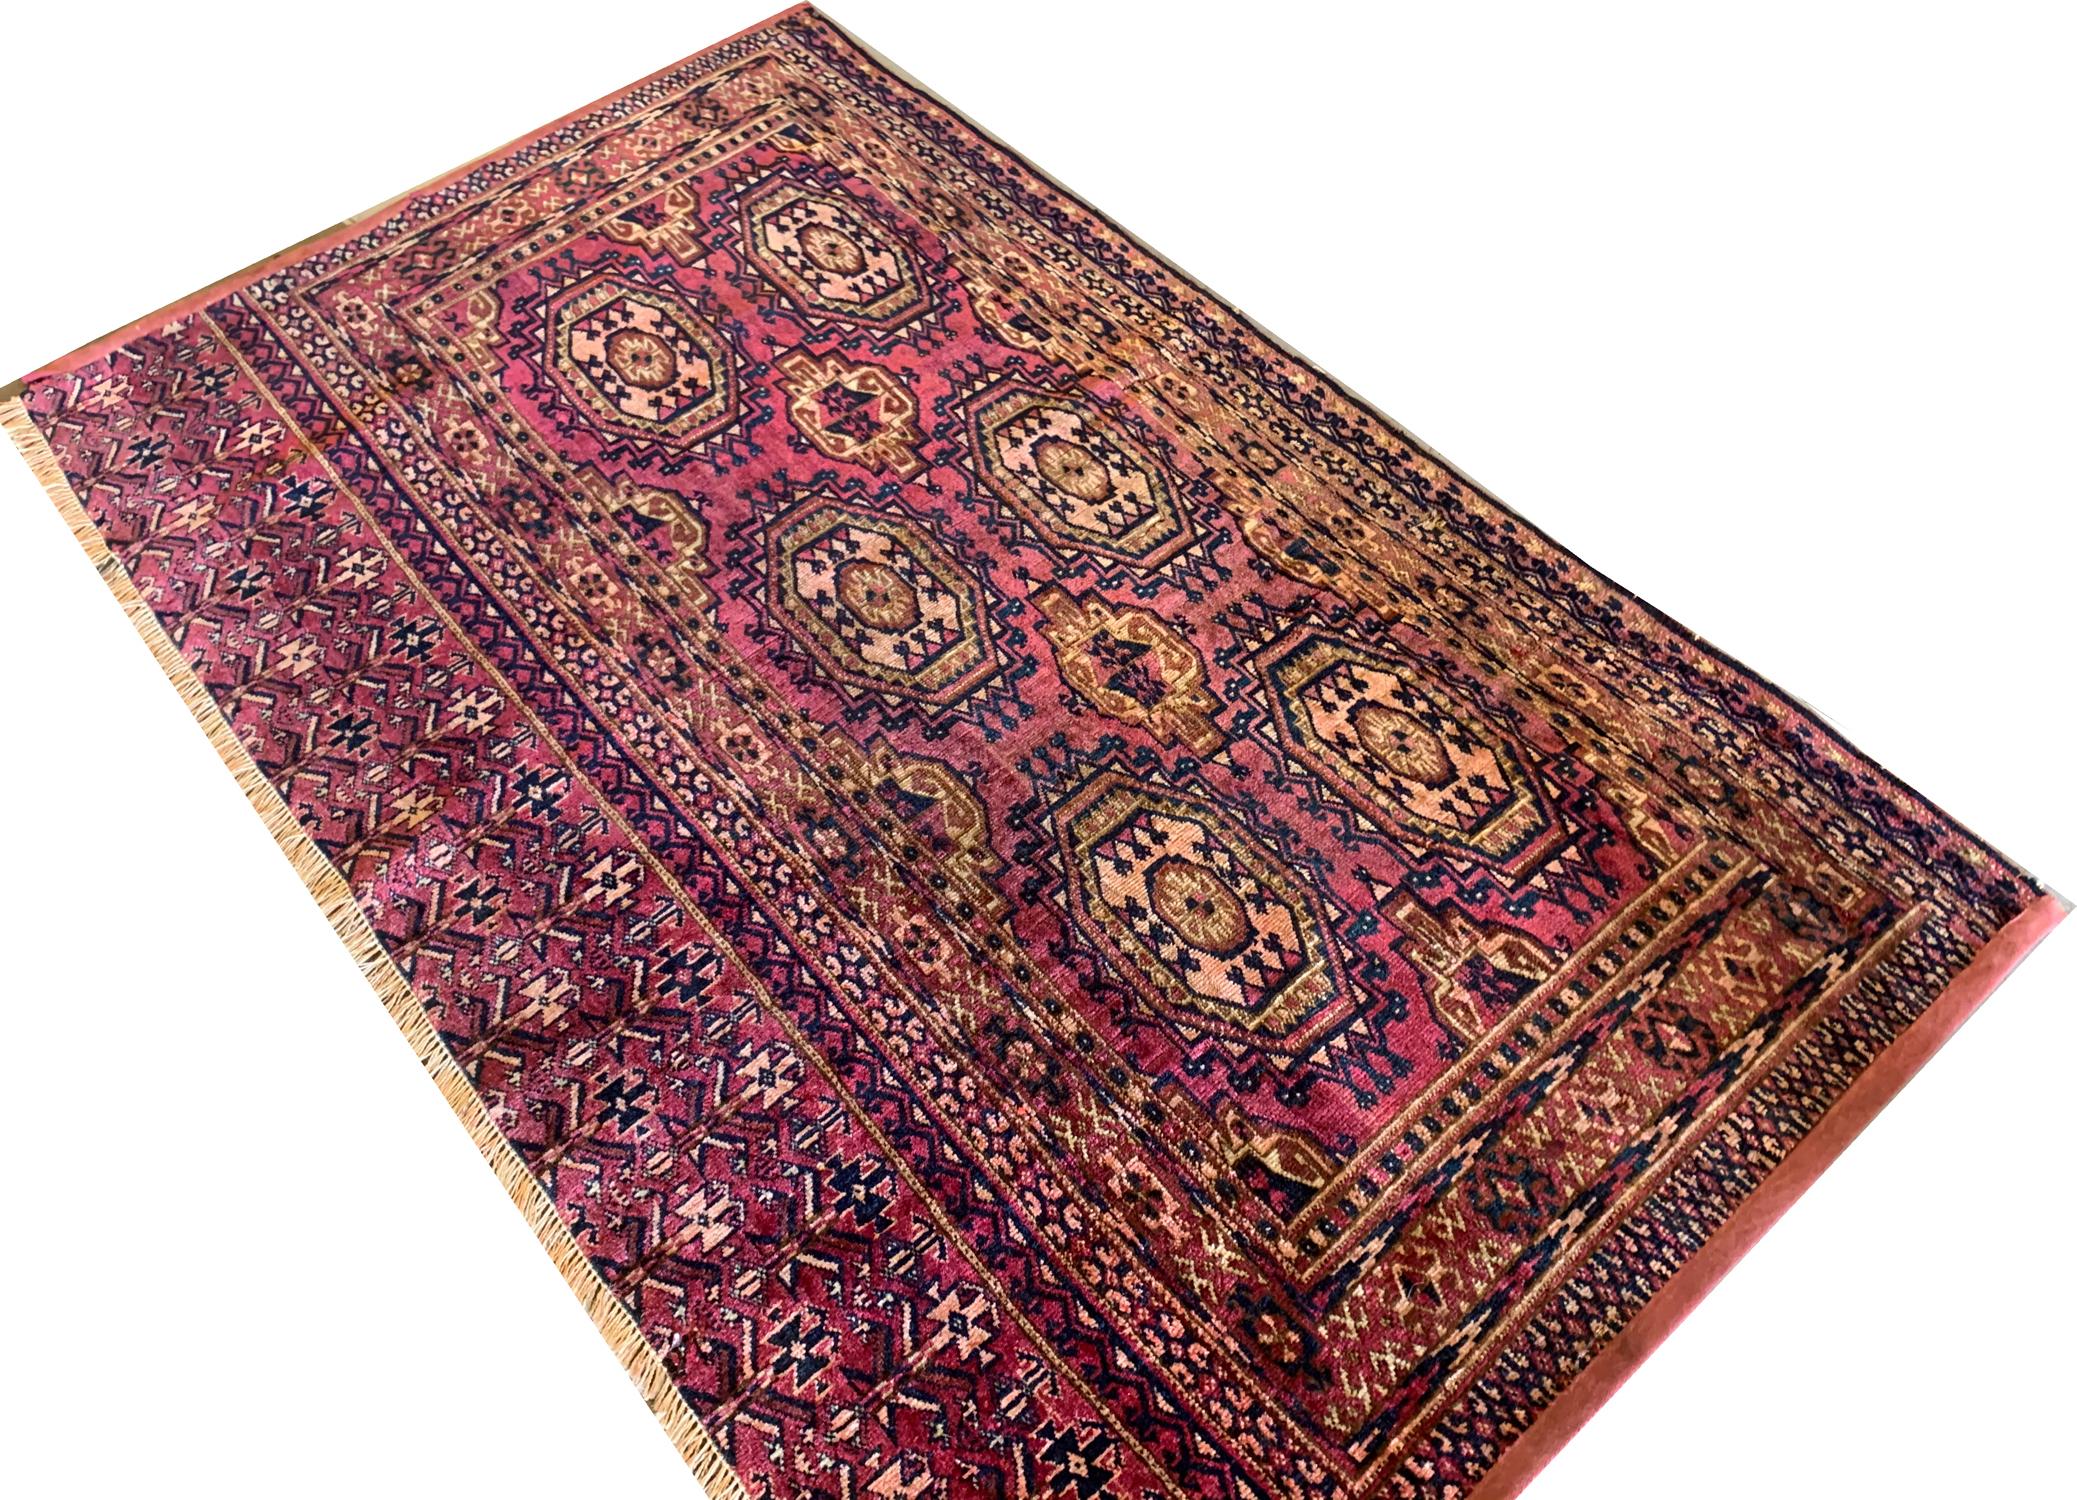 A geometric tribal design has been woven on a rich pink-Rust background in accents of blue, orange, beige and brown. This piece is an antique Asian carpet woven in the 1880s with sophistication and features traditional motifs and patterns. The